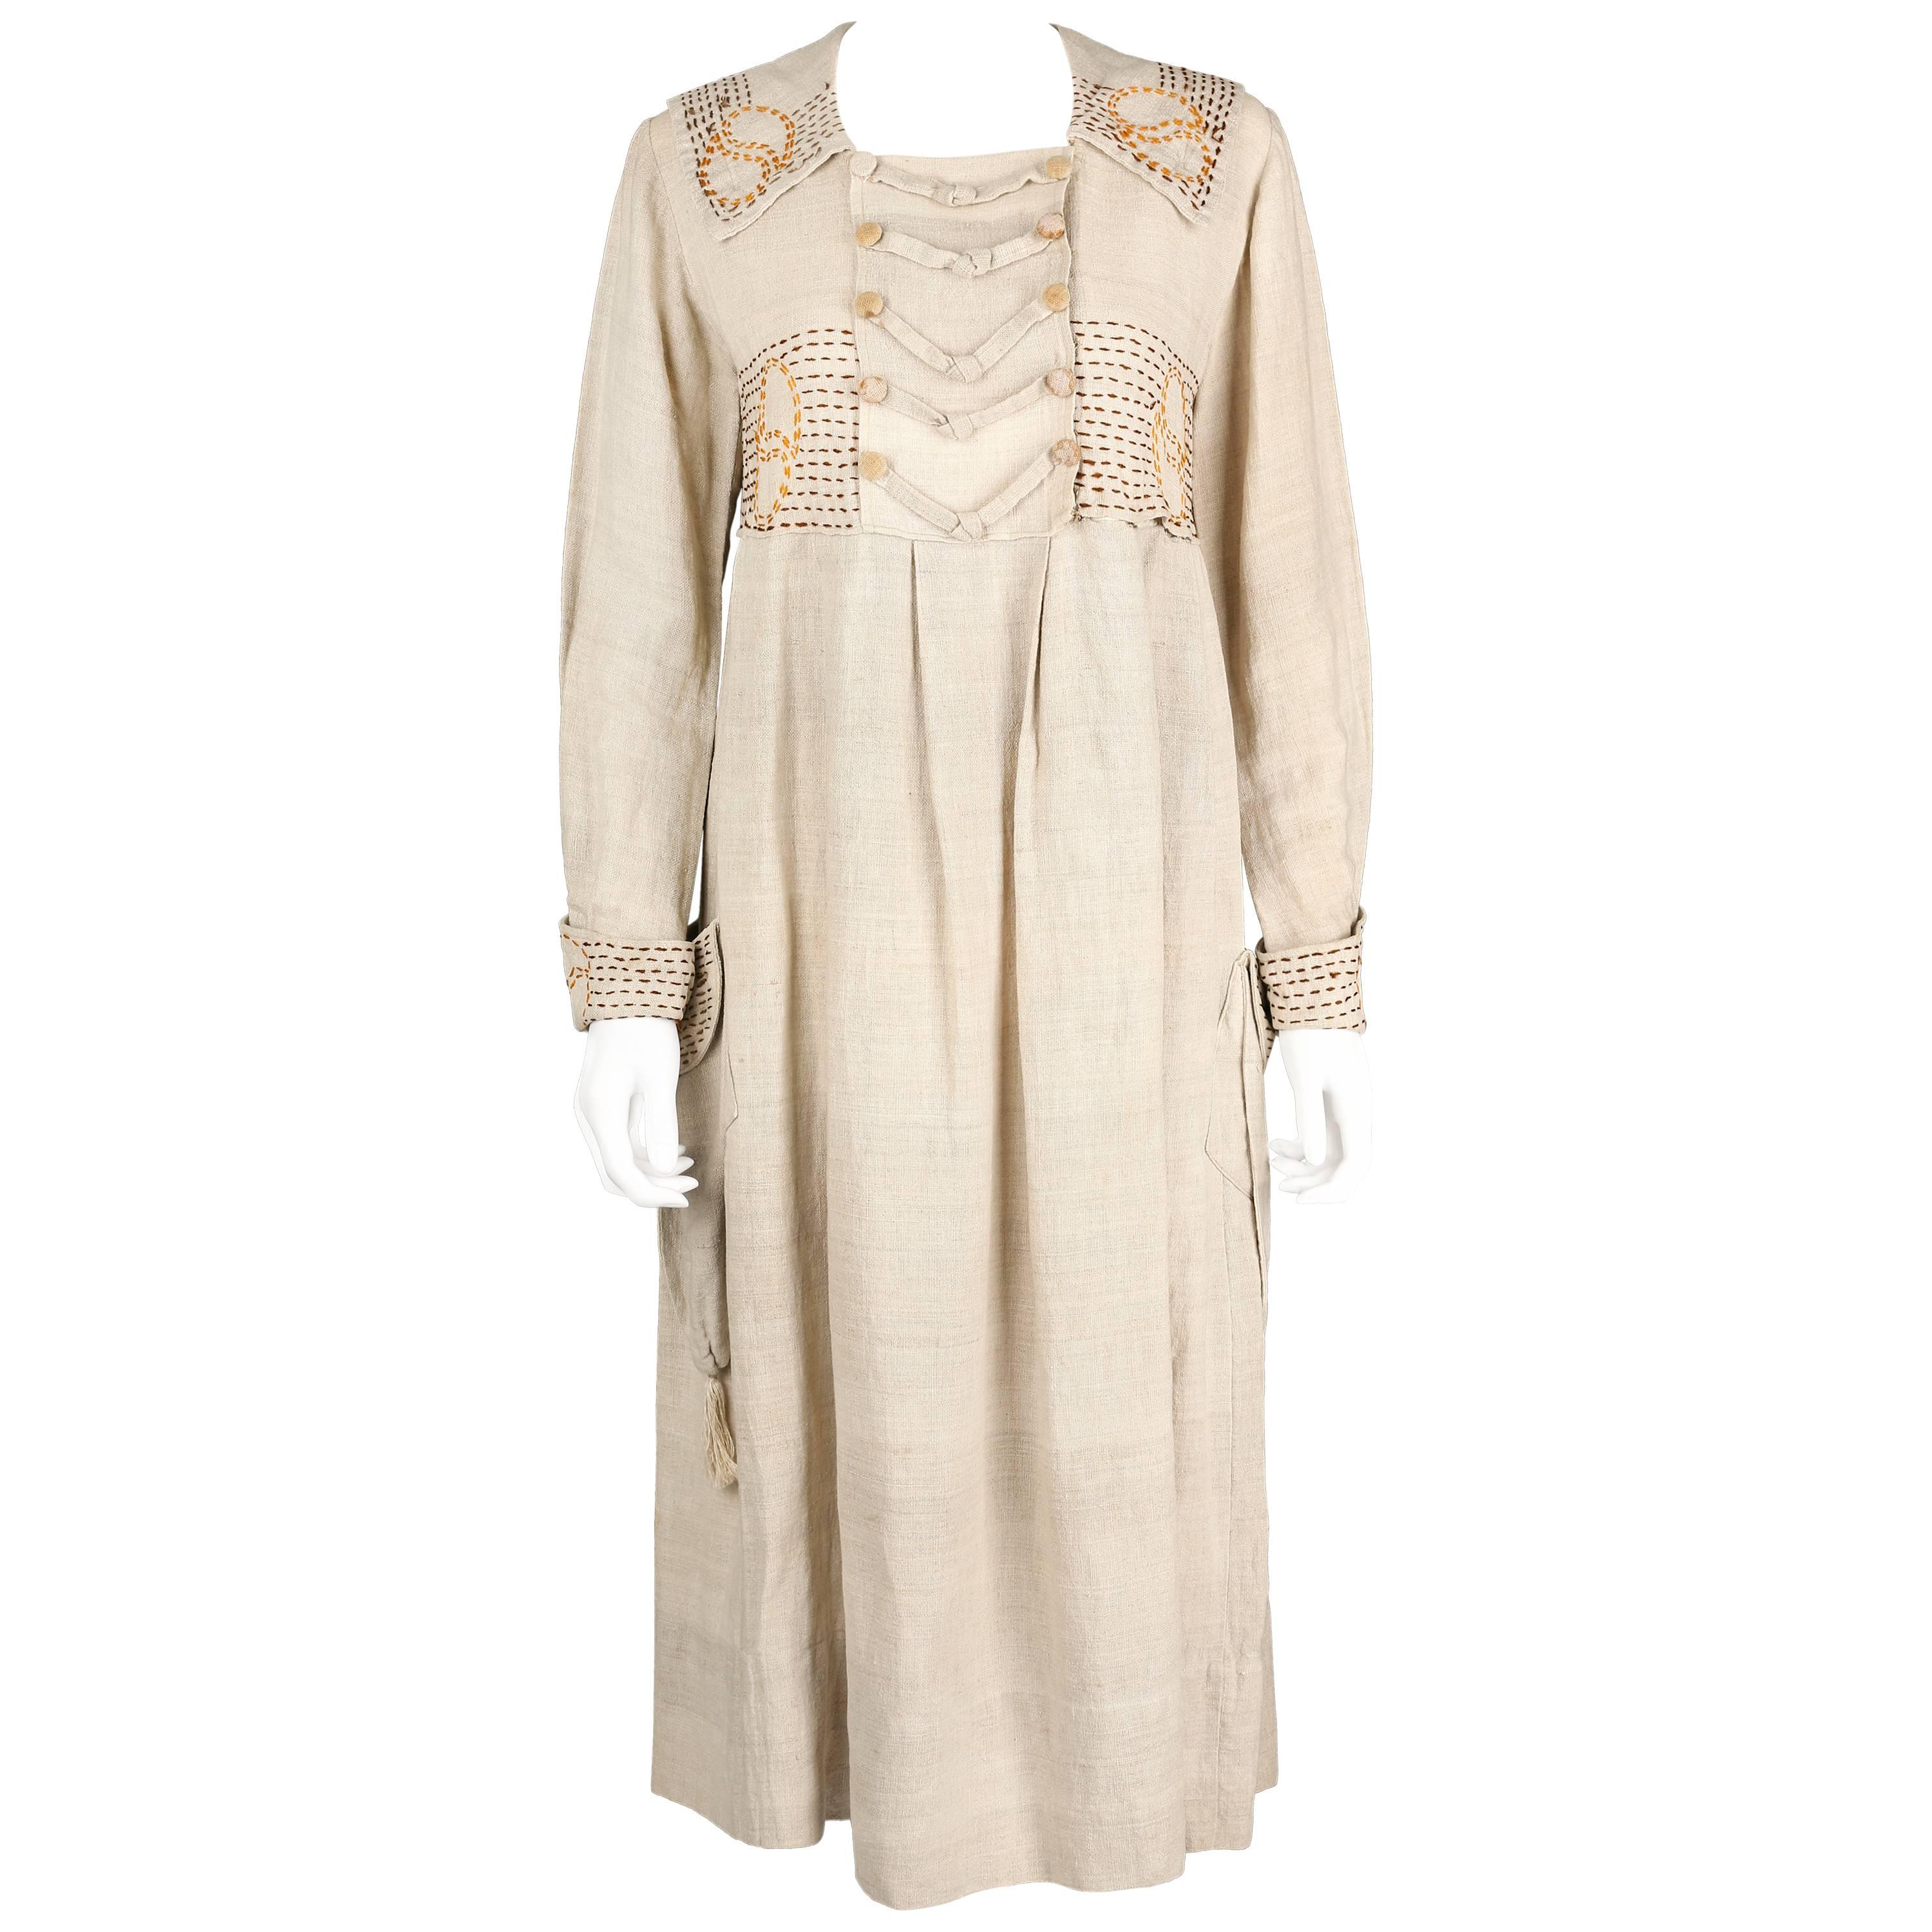 COUTURE Edwardian c.1910s Natural Linen Hand Embroidered Rural Smock Frock Dress